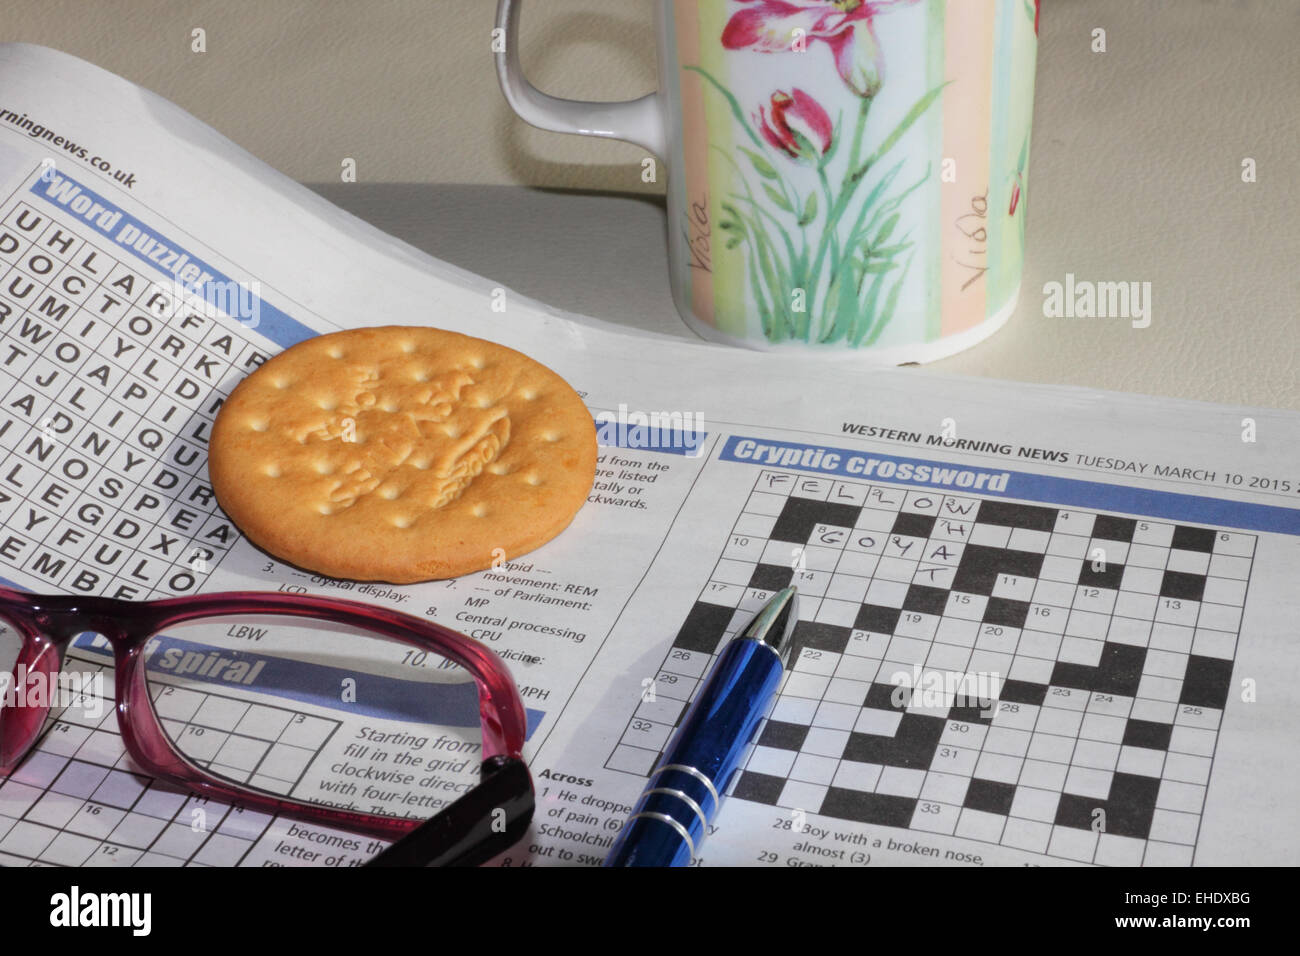 A newspaper open at the crossword page with reading glasses, a pen, mug and biscuit. Stock Photo